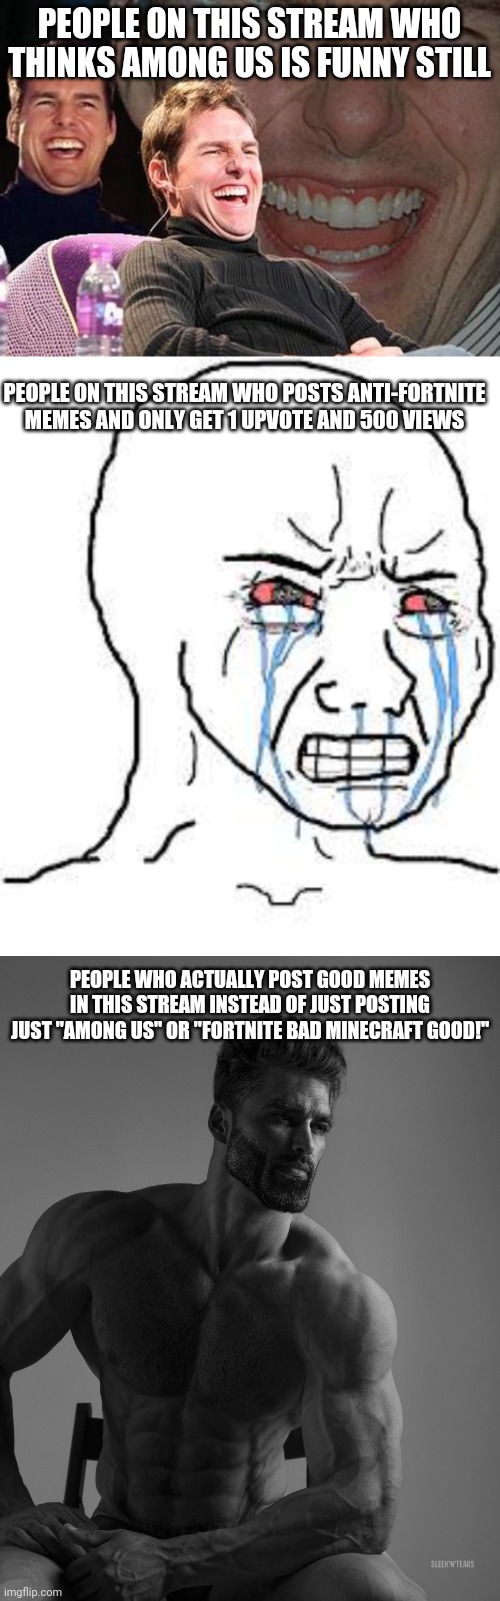 okay. | PEOPLE ON THIS STREAM WHO THINKS AMONG US IS FUNNY STILL; PEOPLE ON THIS STREAM WHO POSTS ANTI-FORTNITE MEMES AND ONLY GET 1 UPVOTE AND 500 VIEWS; PEOPLE WHO ACTUALLY POST GOOD MEMES IN THIS STREAM INSTEAD OF JUST POSTING JUST "AMONG US" OR "FORTNITE BAD MINECRAFT GOOD!" | image tagged in tom cruise laugh,wojak,giga chad,fortnite,minecraft,among us | made w/ Imgflip meme maker